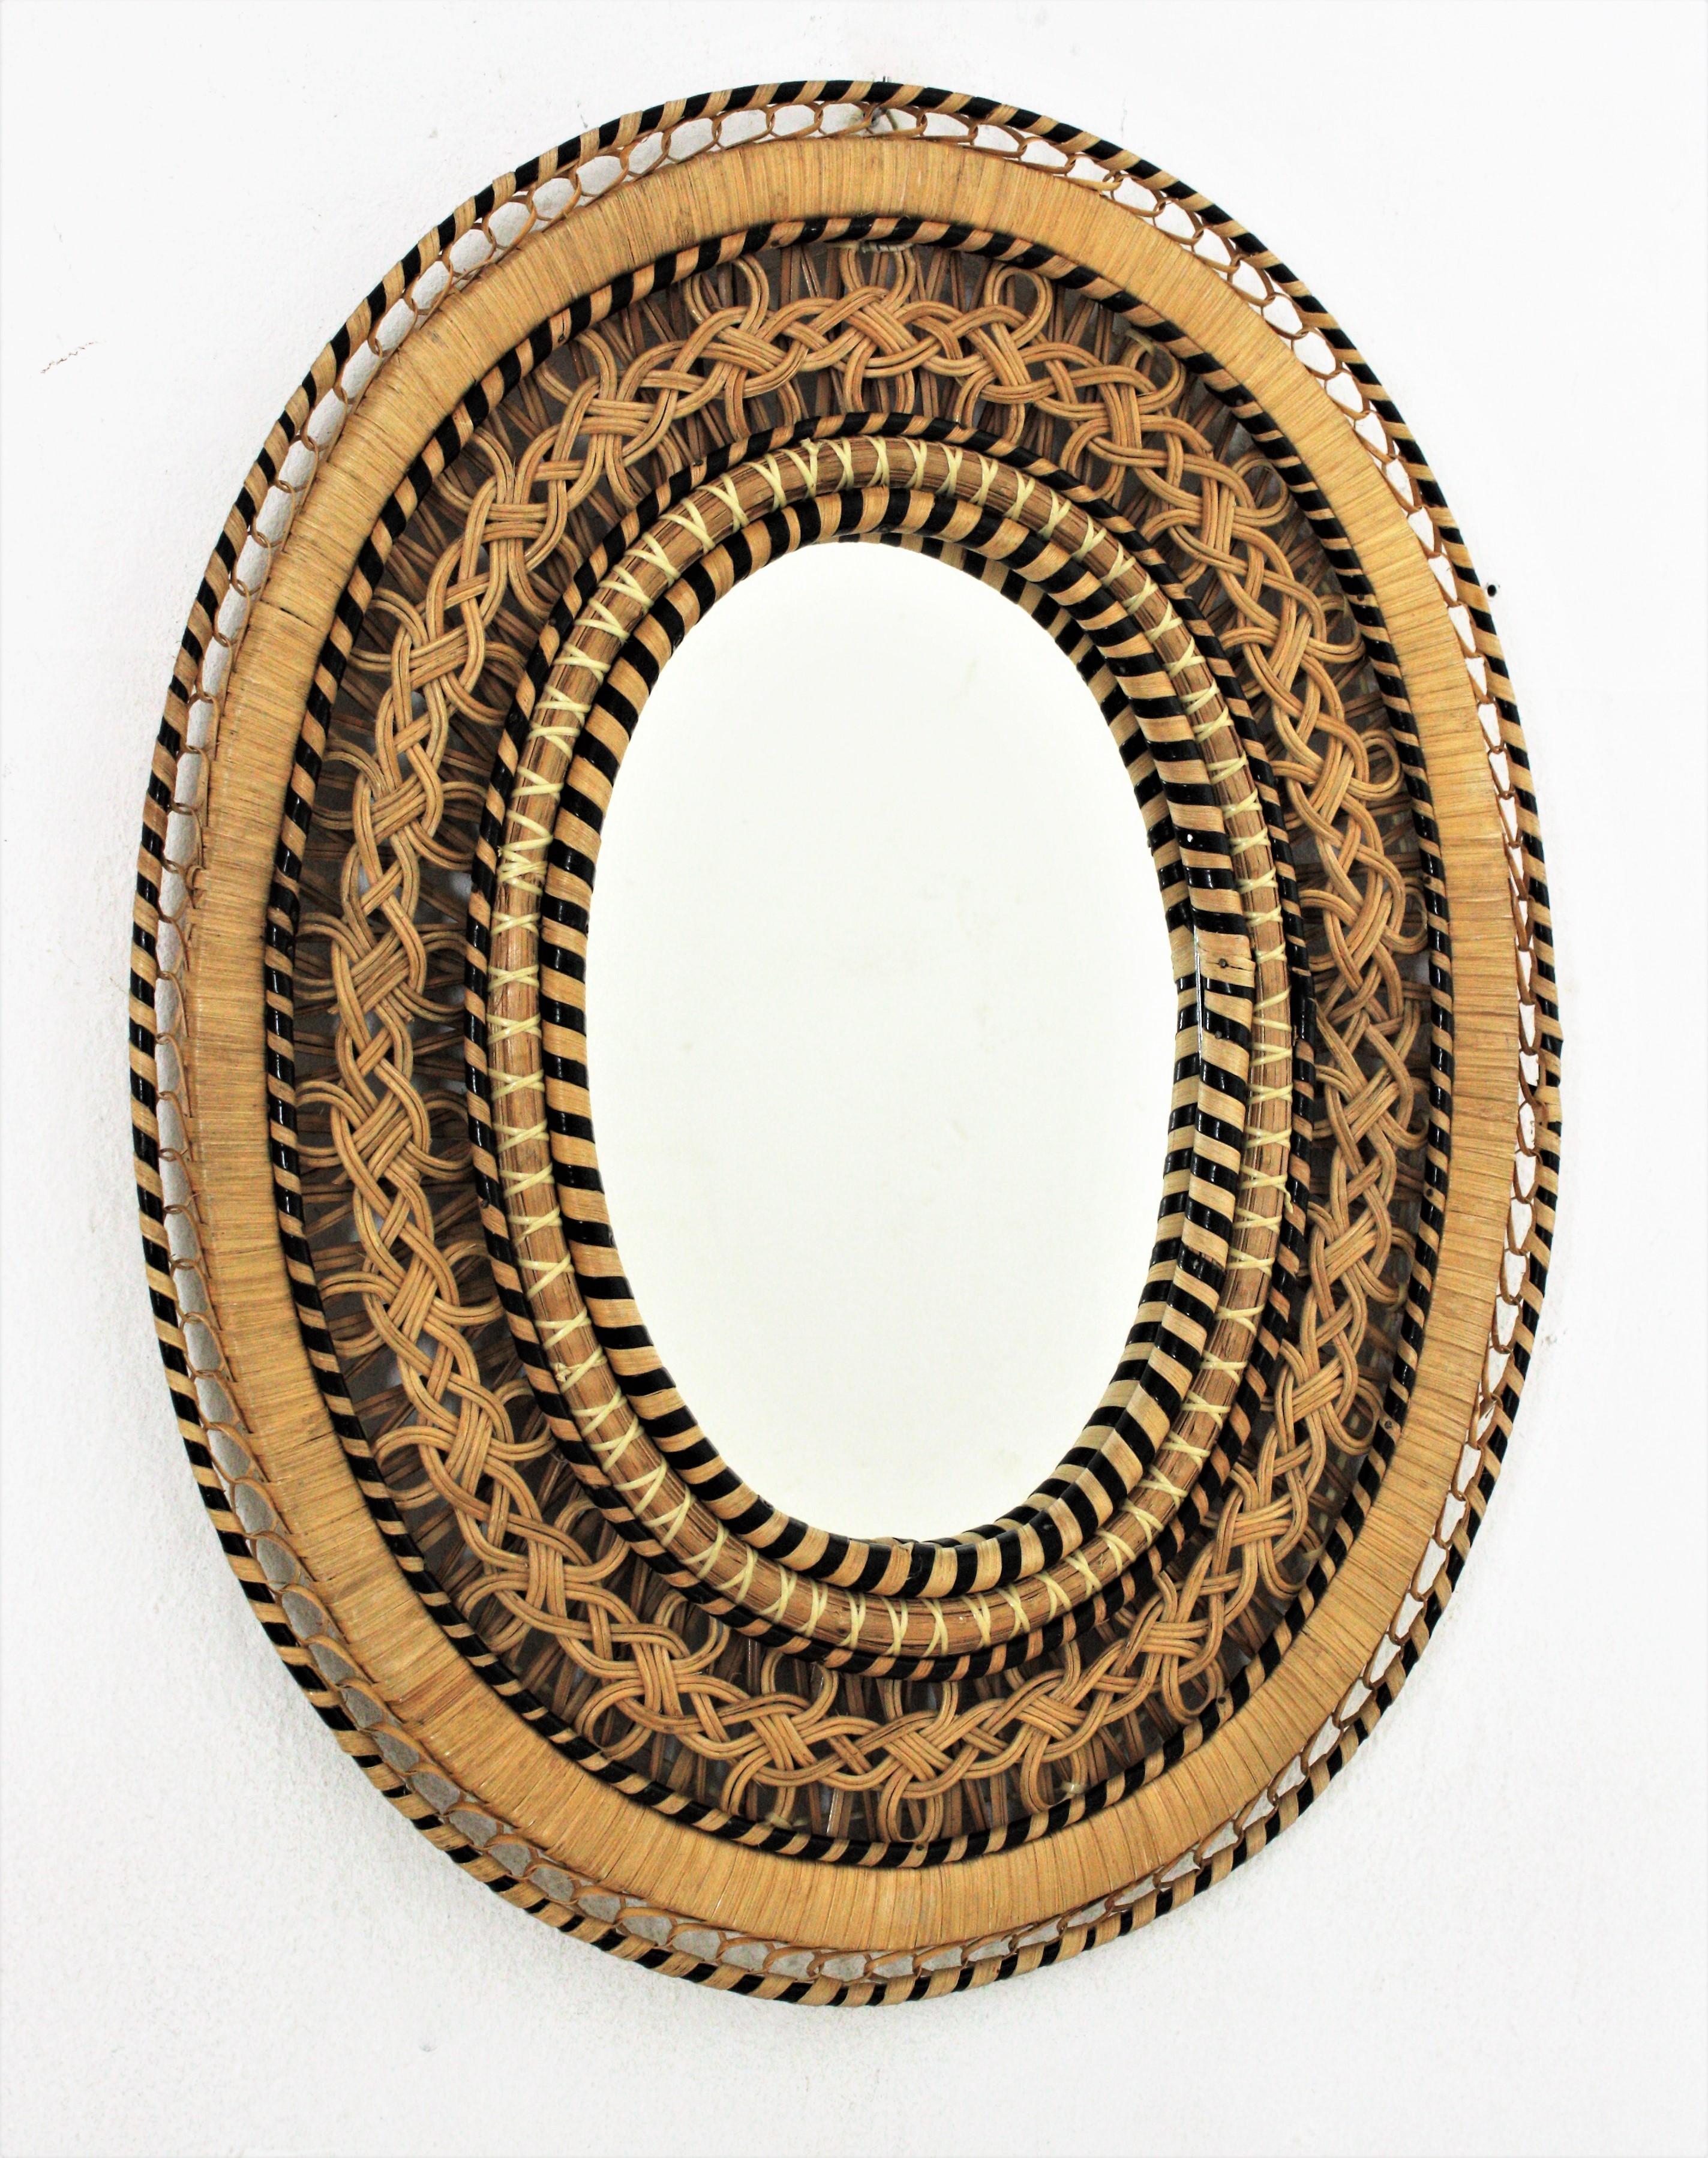 Peacock Emmanuelle Oval mirror, braided wicker, midcentury.
Spanish woven wicker and rattan oval shaped mirror, Spain, 1960s-1970s.
This mirror has a very detailded filigree handcrafted woven work combining nude color and black color creating a